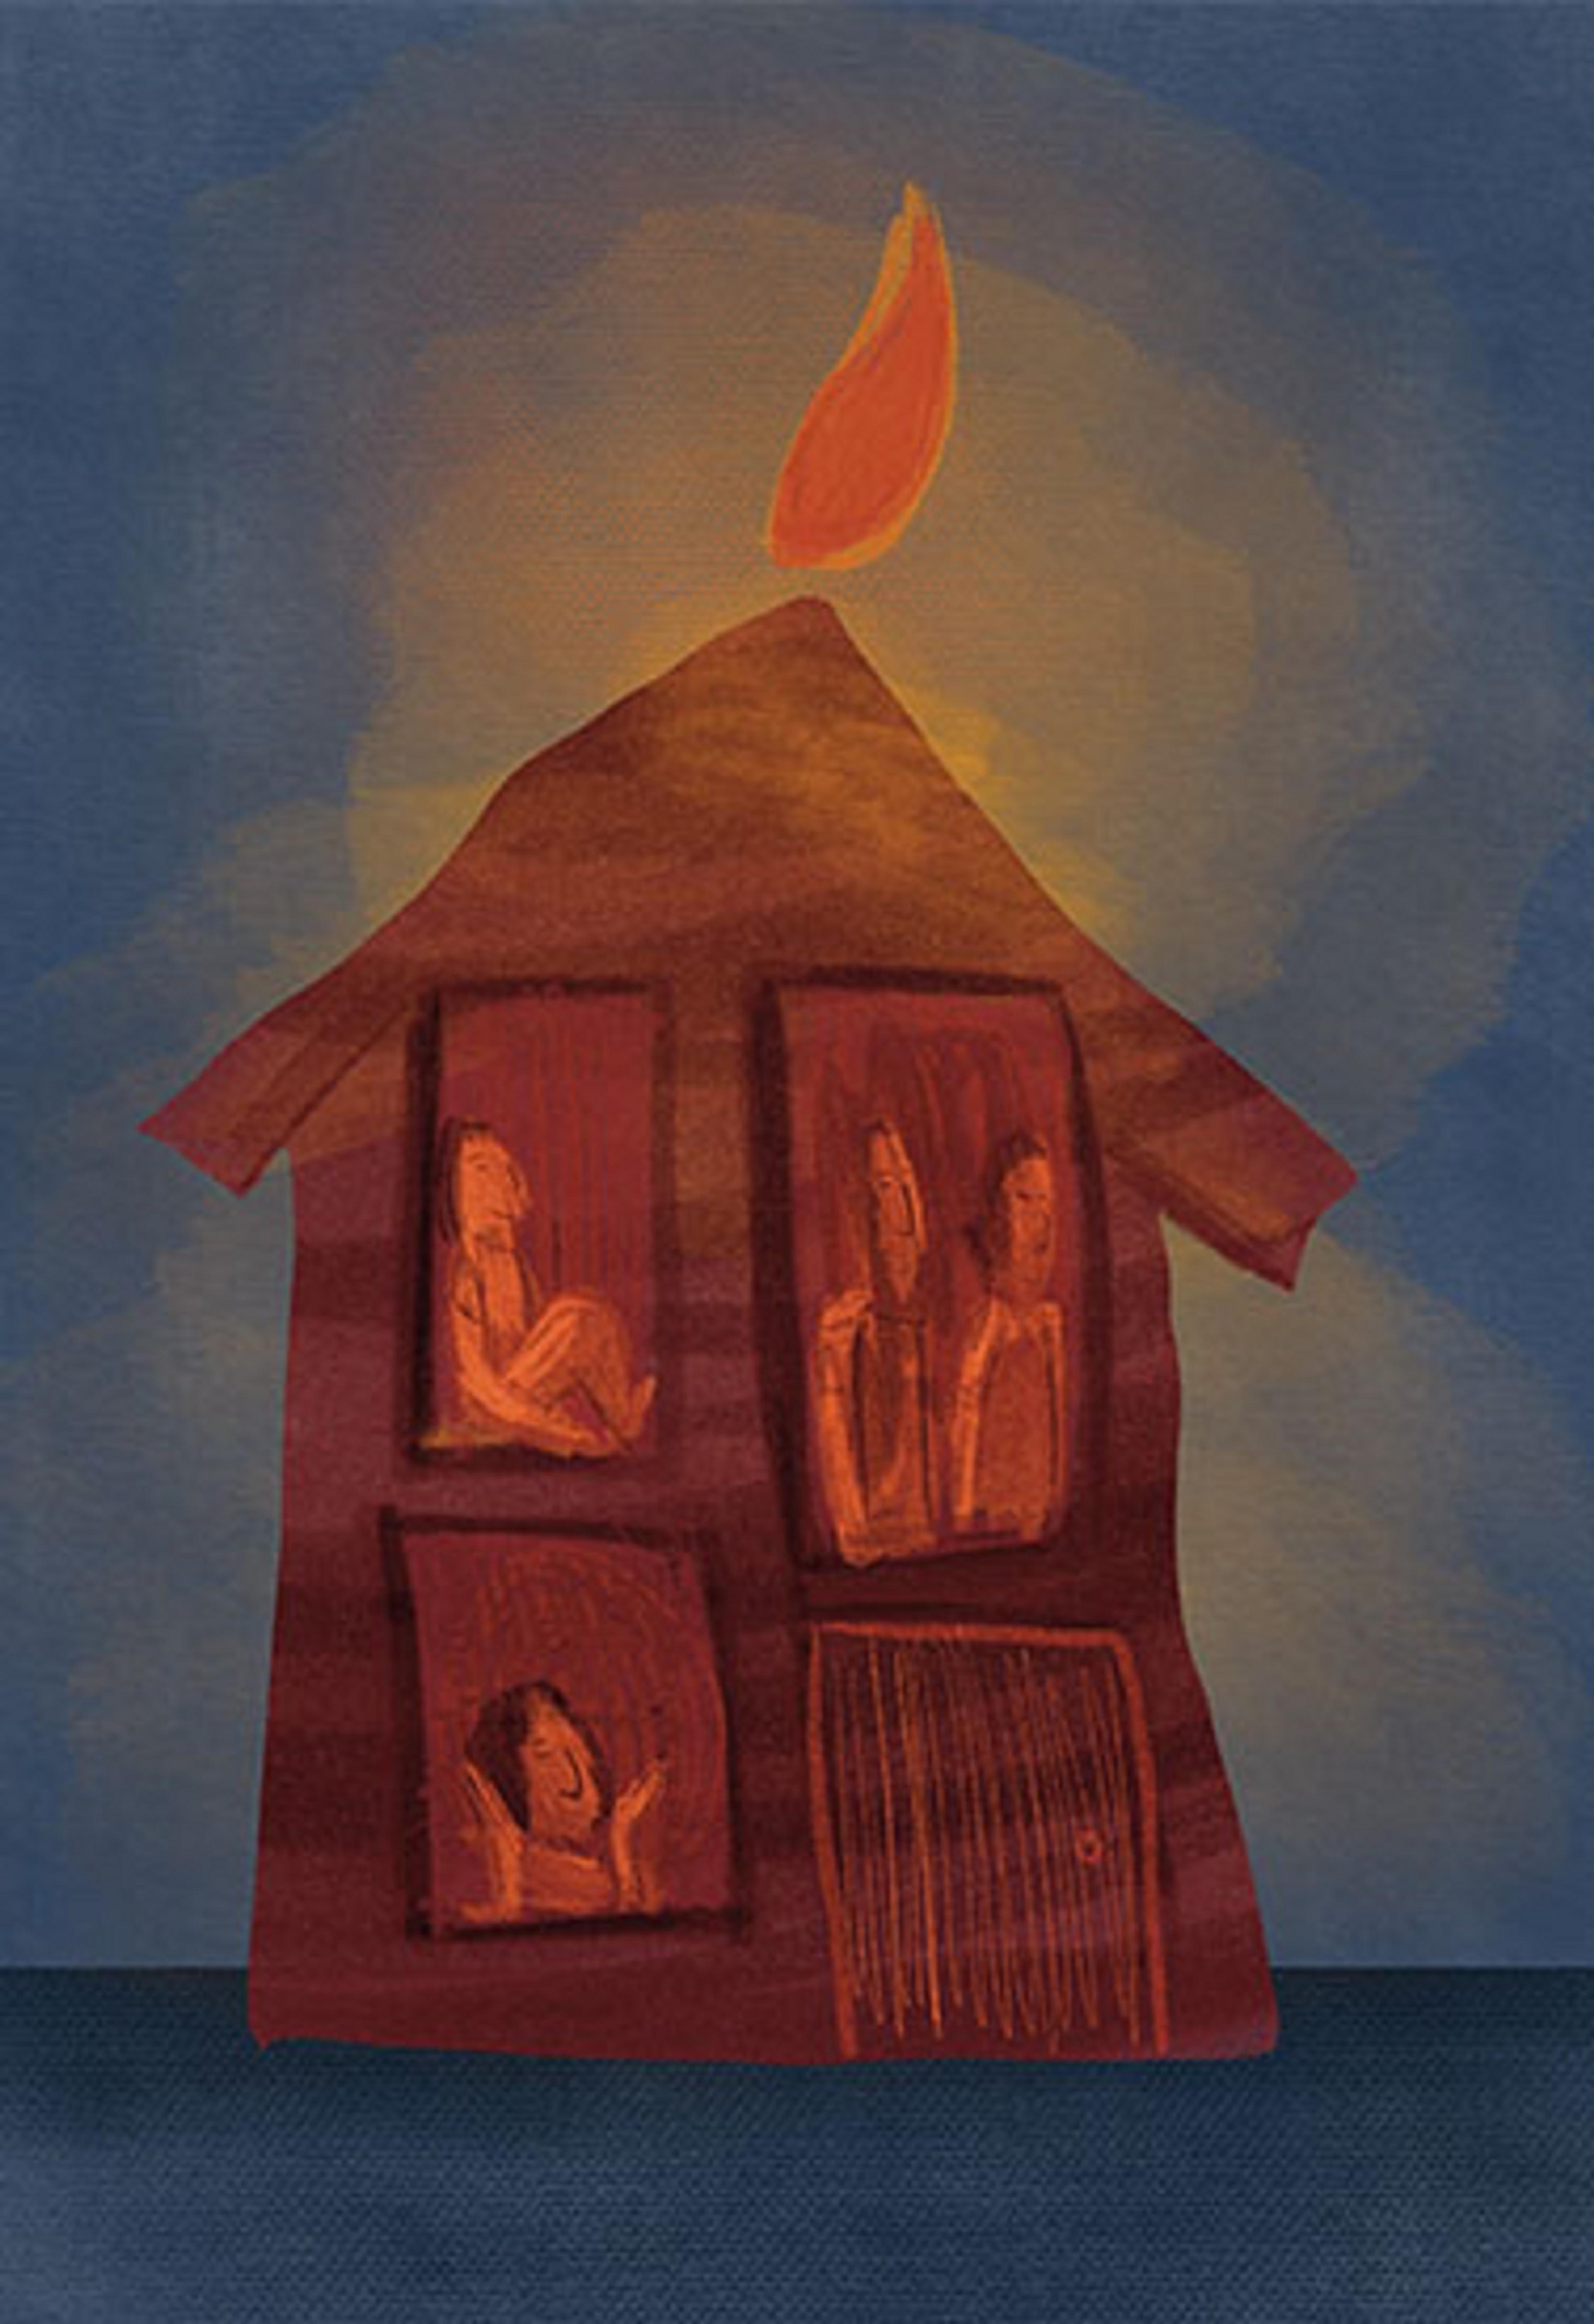 Illustration of a candle-shaped house with people visible in the windows